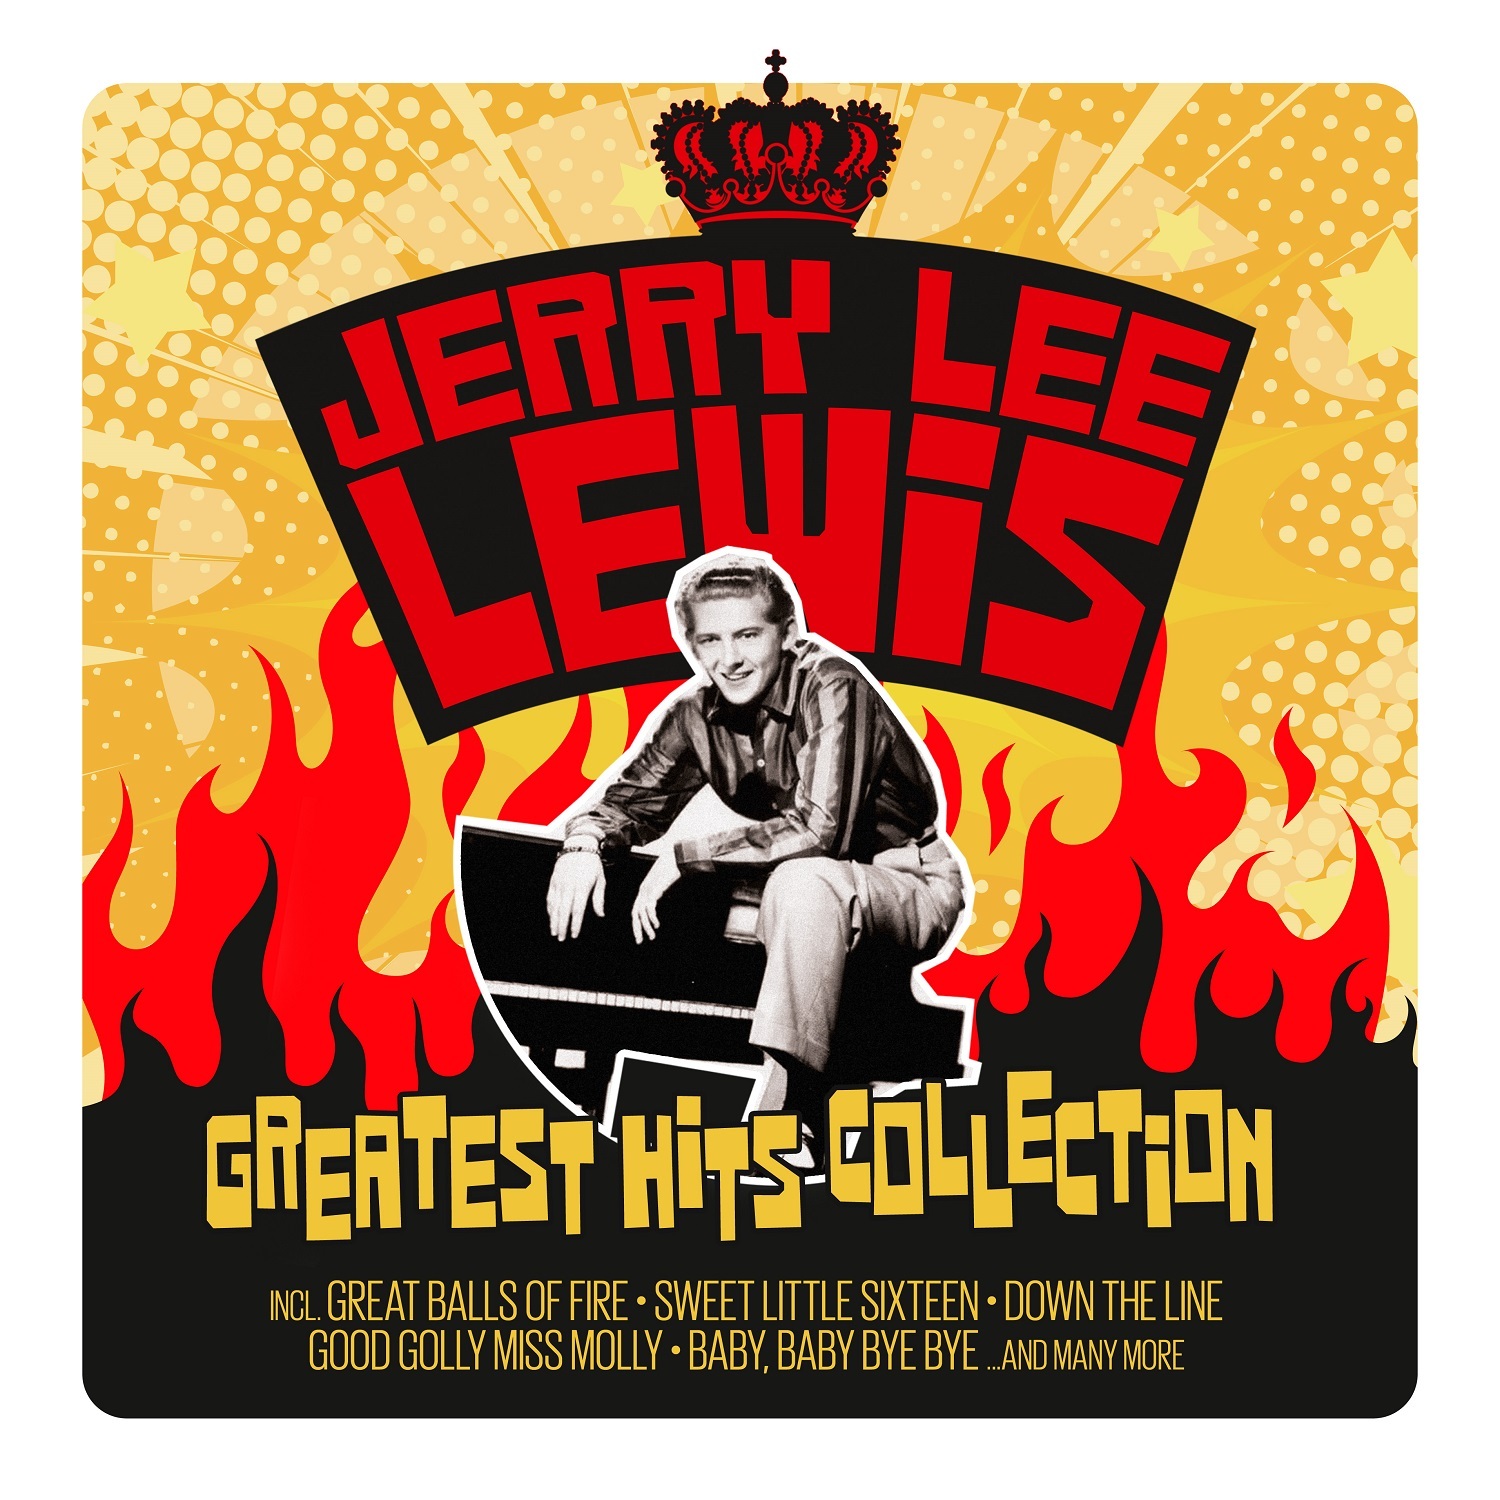 Jerry Lee Lewis great balls of Fire. Jerry Lee Lewis the collection LP. Jerry Lee Lewis great balls of Fire album. Jerry Vale "Greatest Hits" обложки альбомов. Greatest hits collection